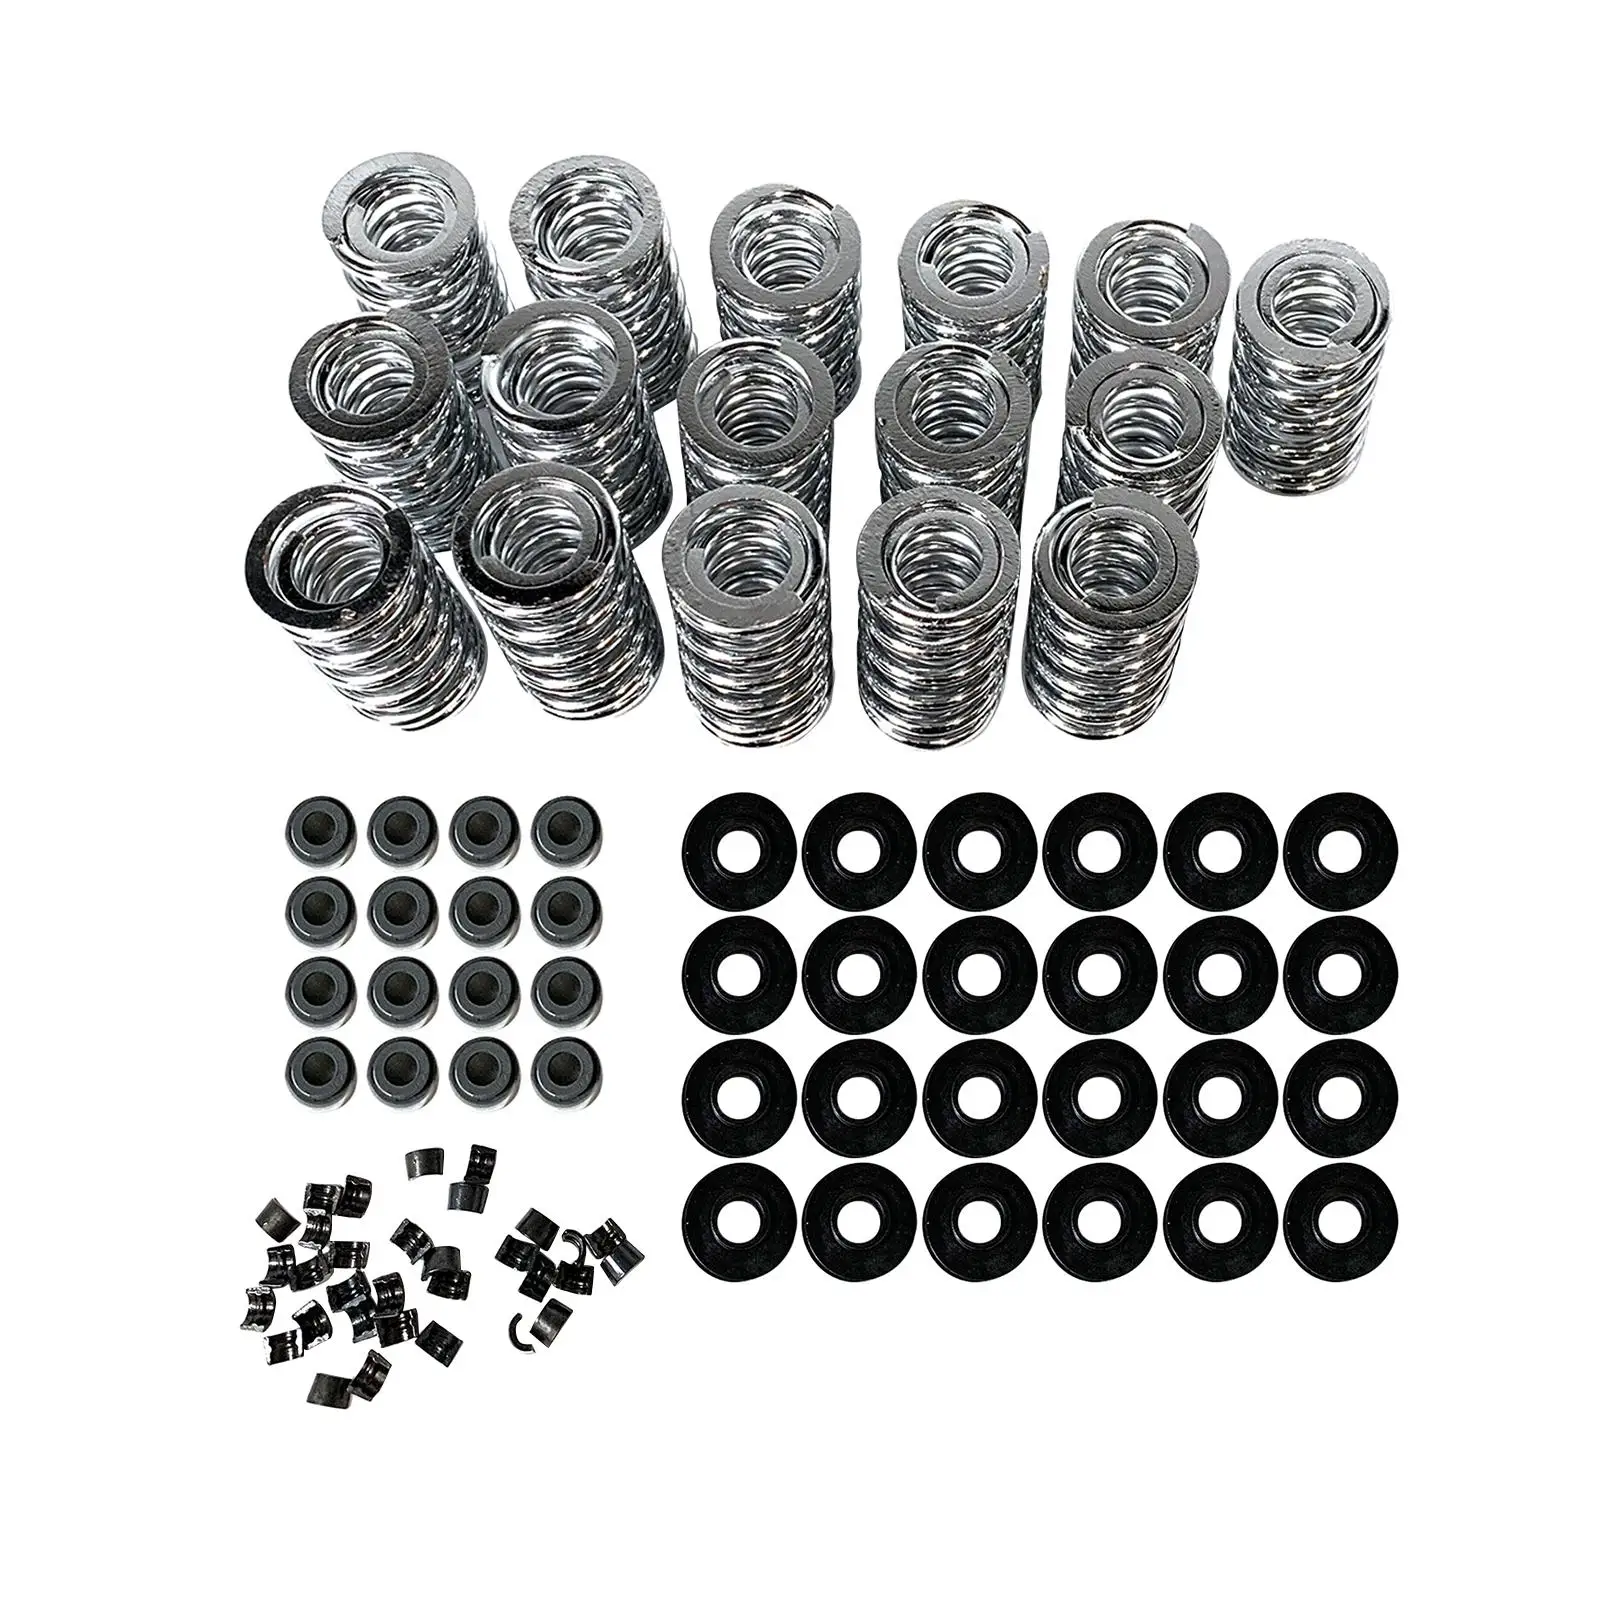 Dual Valve Springs Set Durable Premium Spare Parts High Performance with Retainers Replacement for 4.8 5.3 6.0 LS1 LS2 LS3